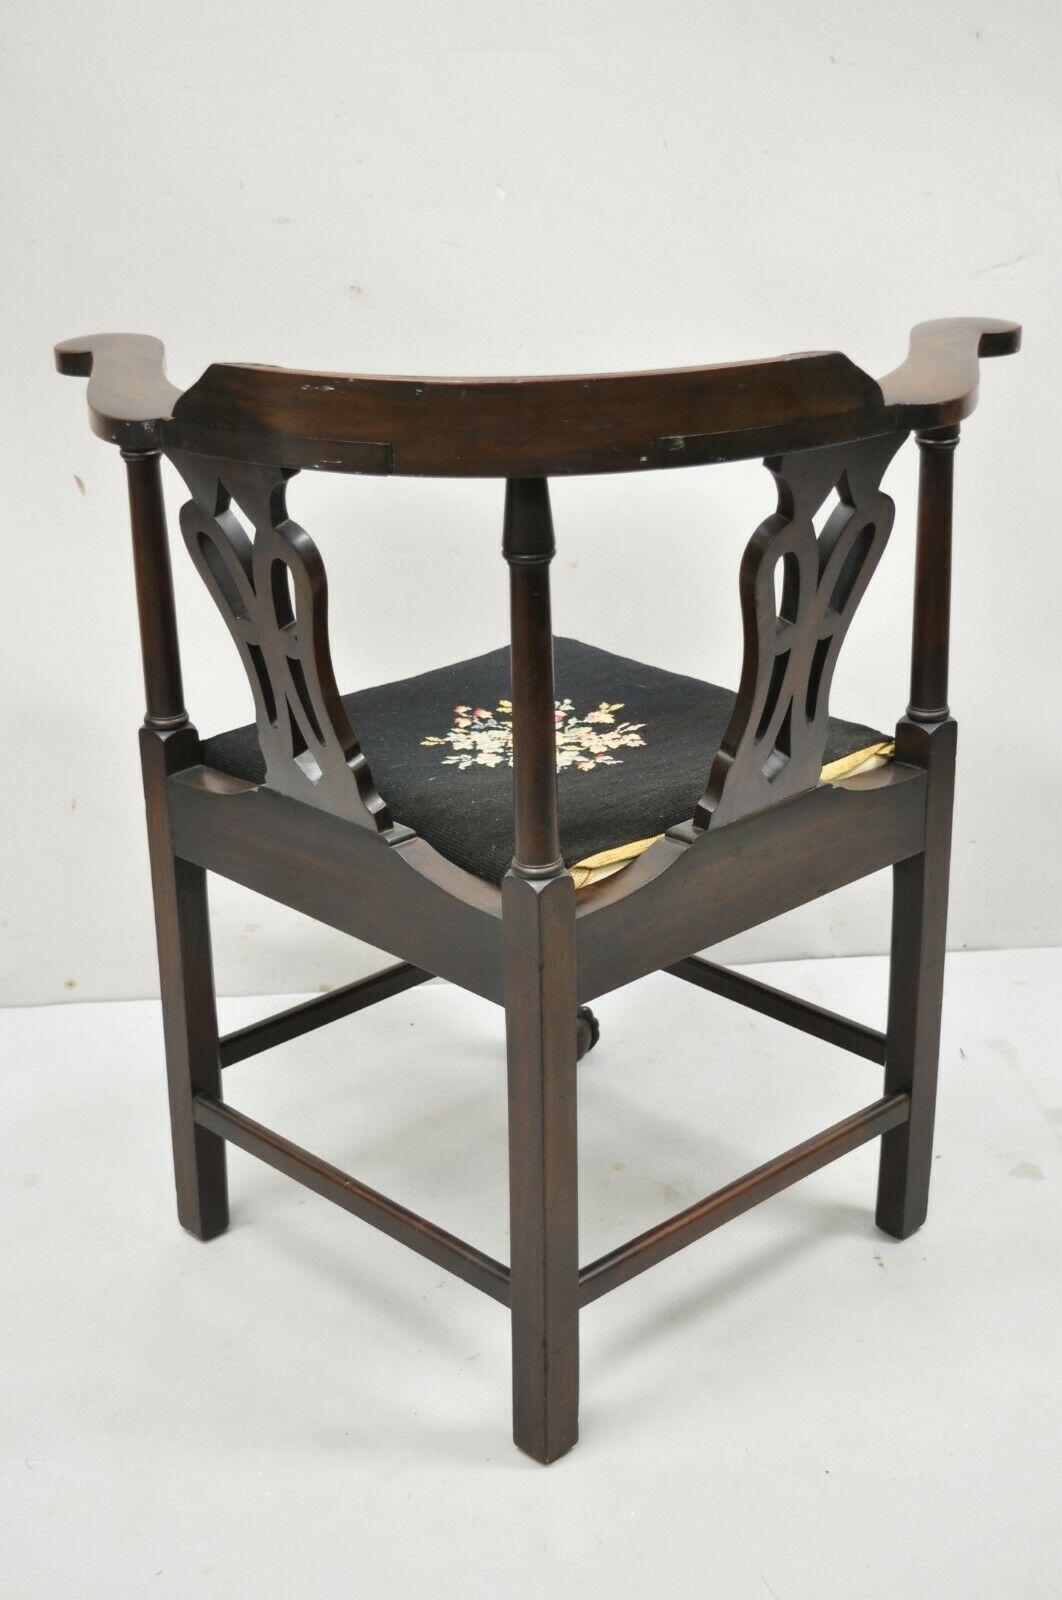 Antique English Chippendale Georgian Style Mahogany Ball and Claw Corner Chair For Sale 3